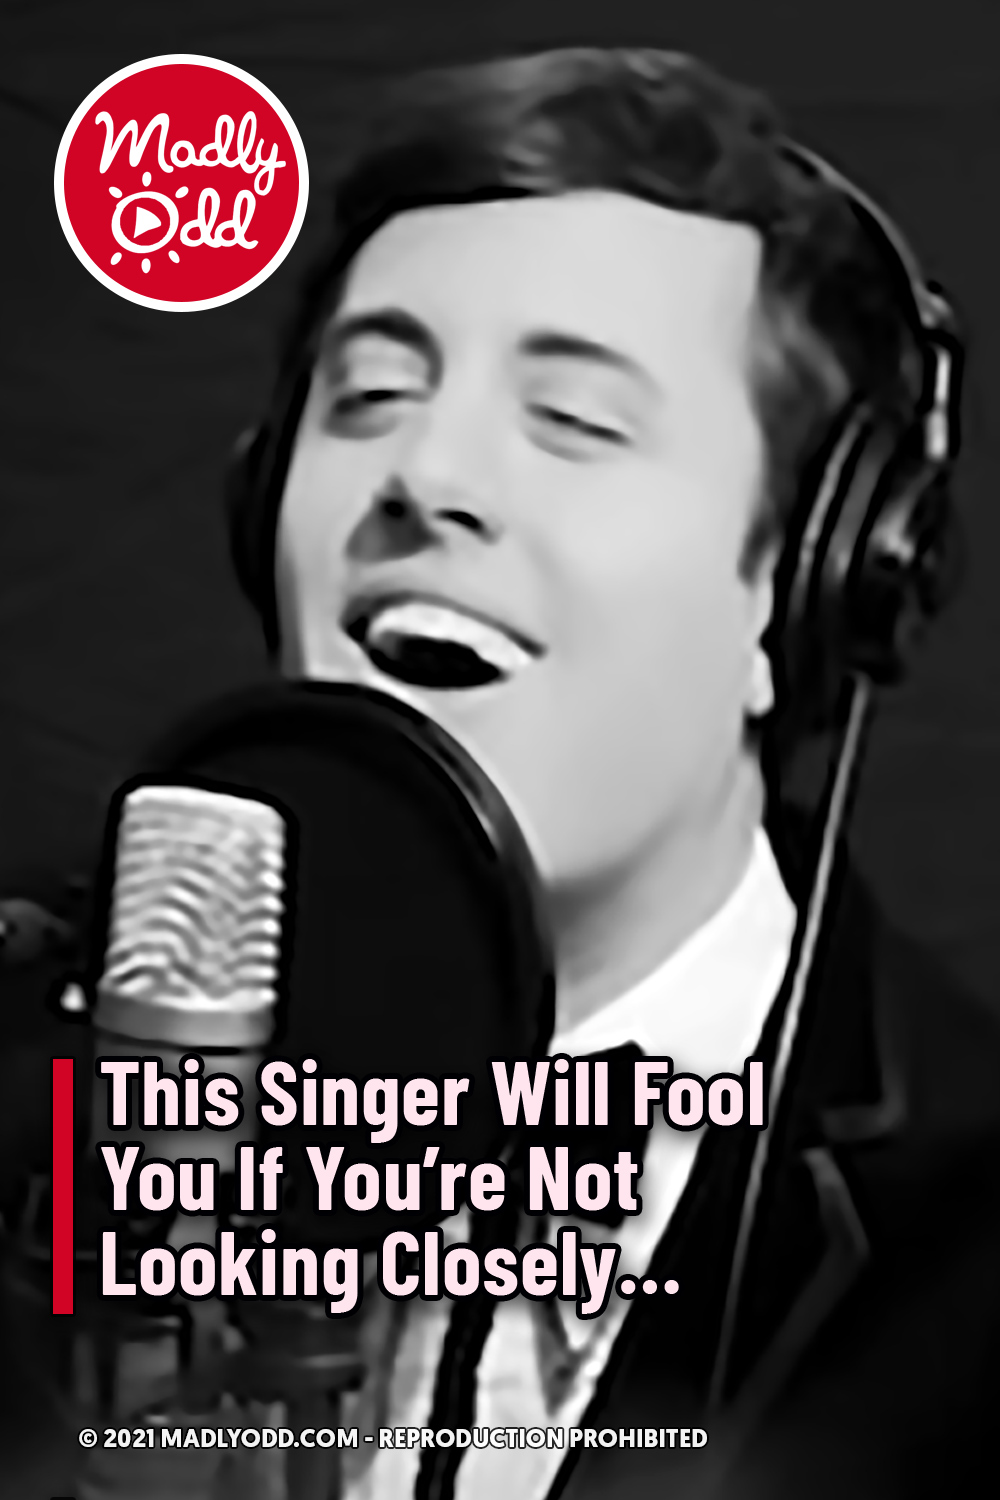 This Singer Will Fool You If You’re Not Looking Closely...